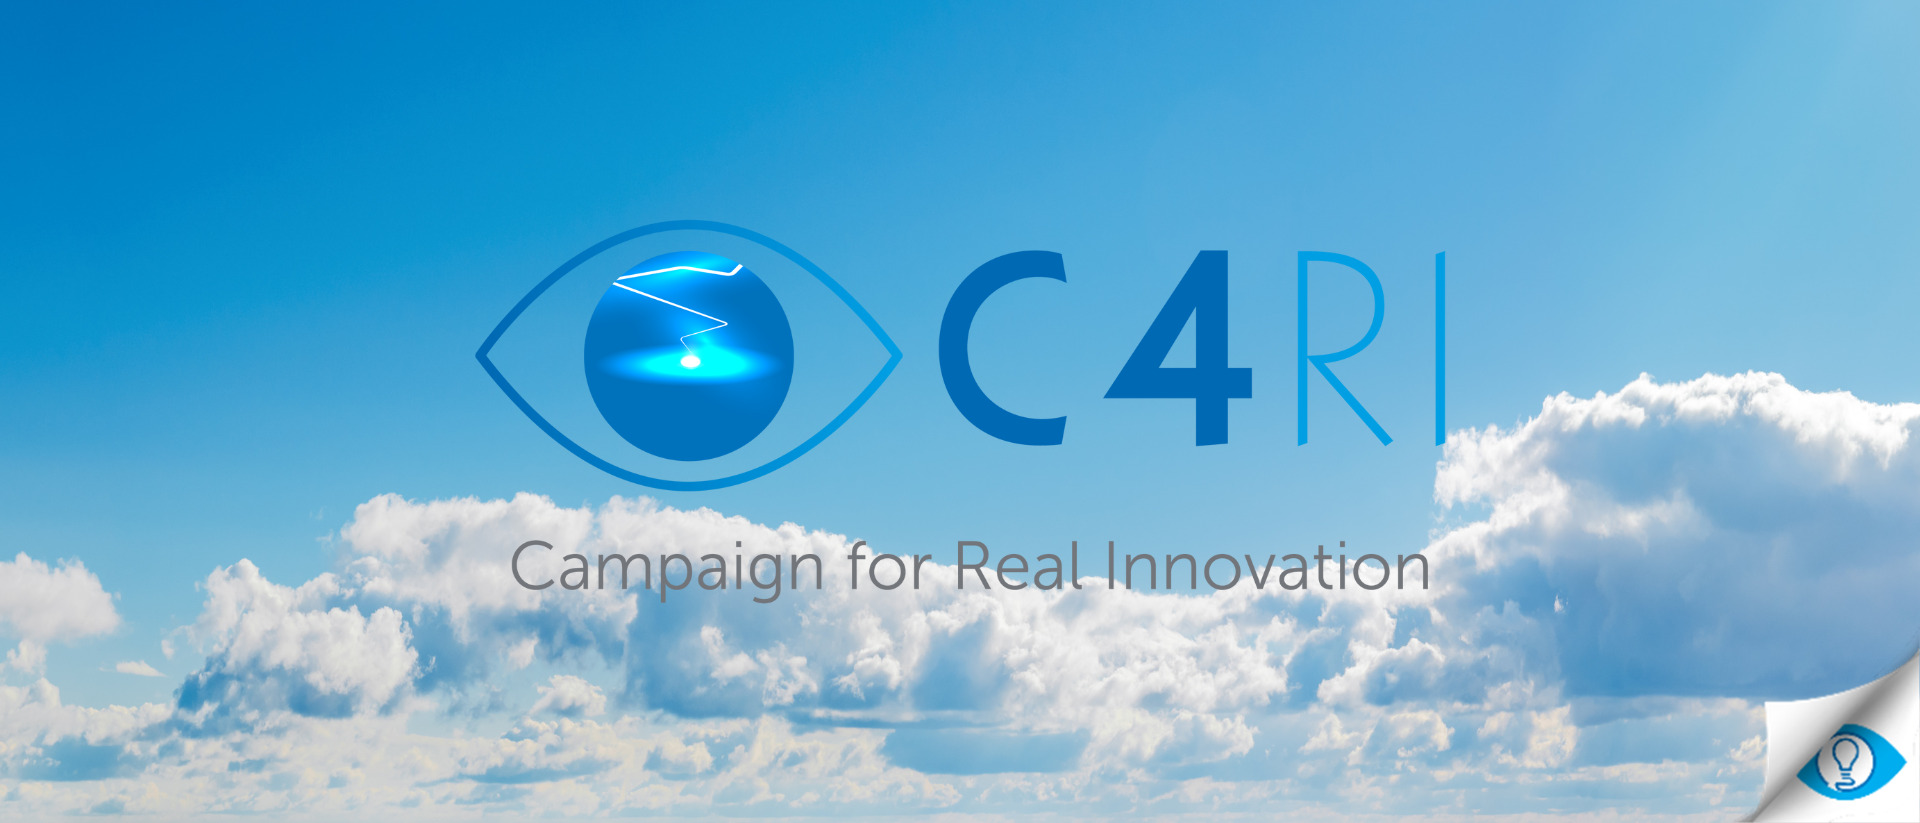 The Campaign for Real Innovation - Blue Yonder Research